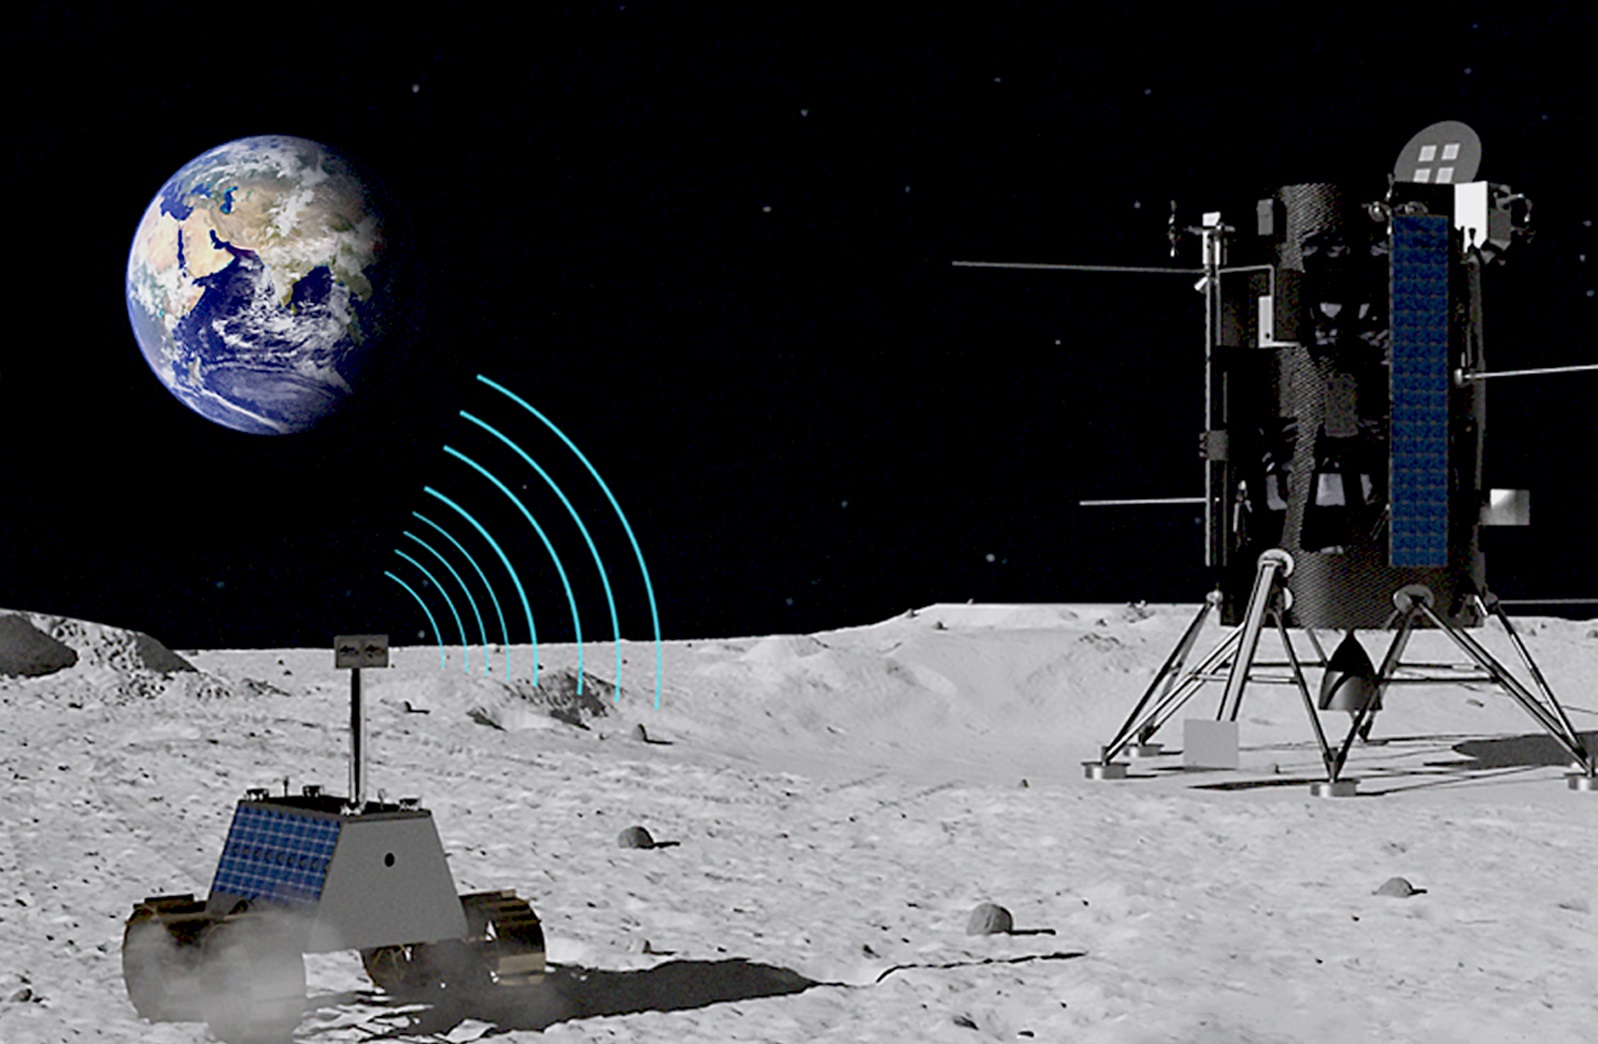 concept of how LTE networks will work on lunar surface